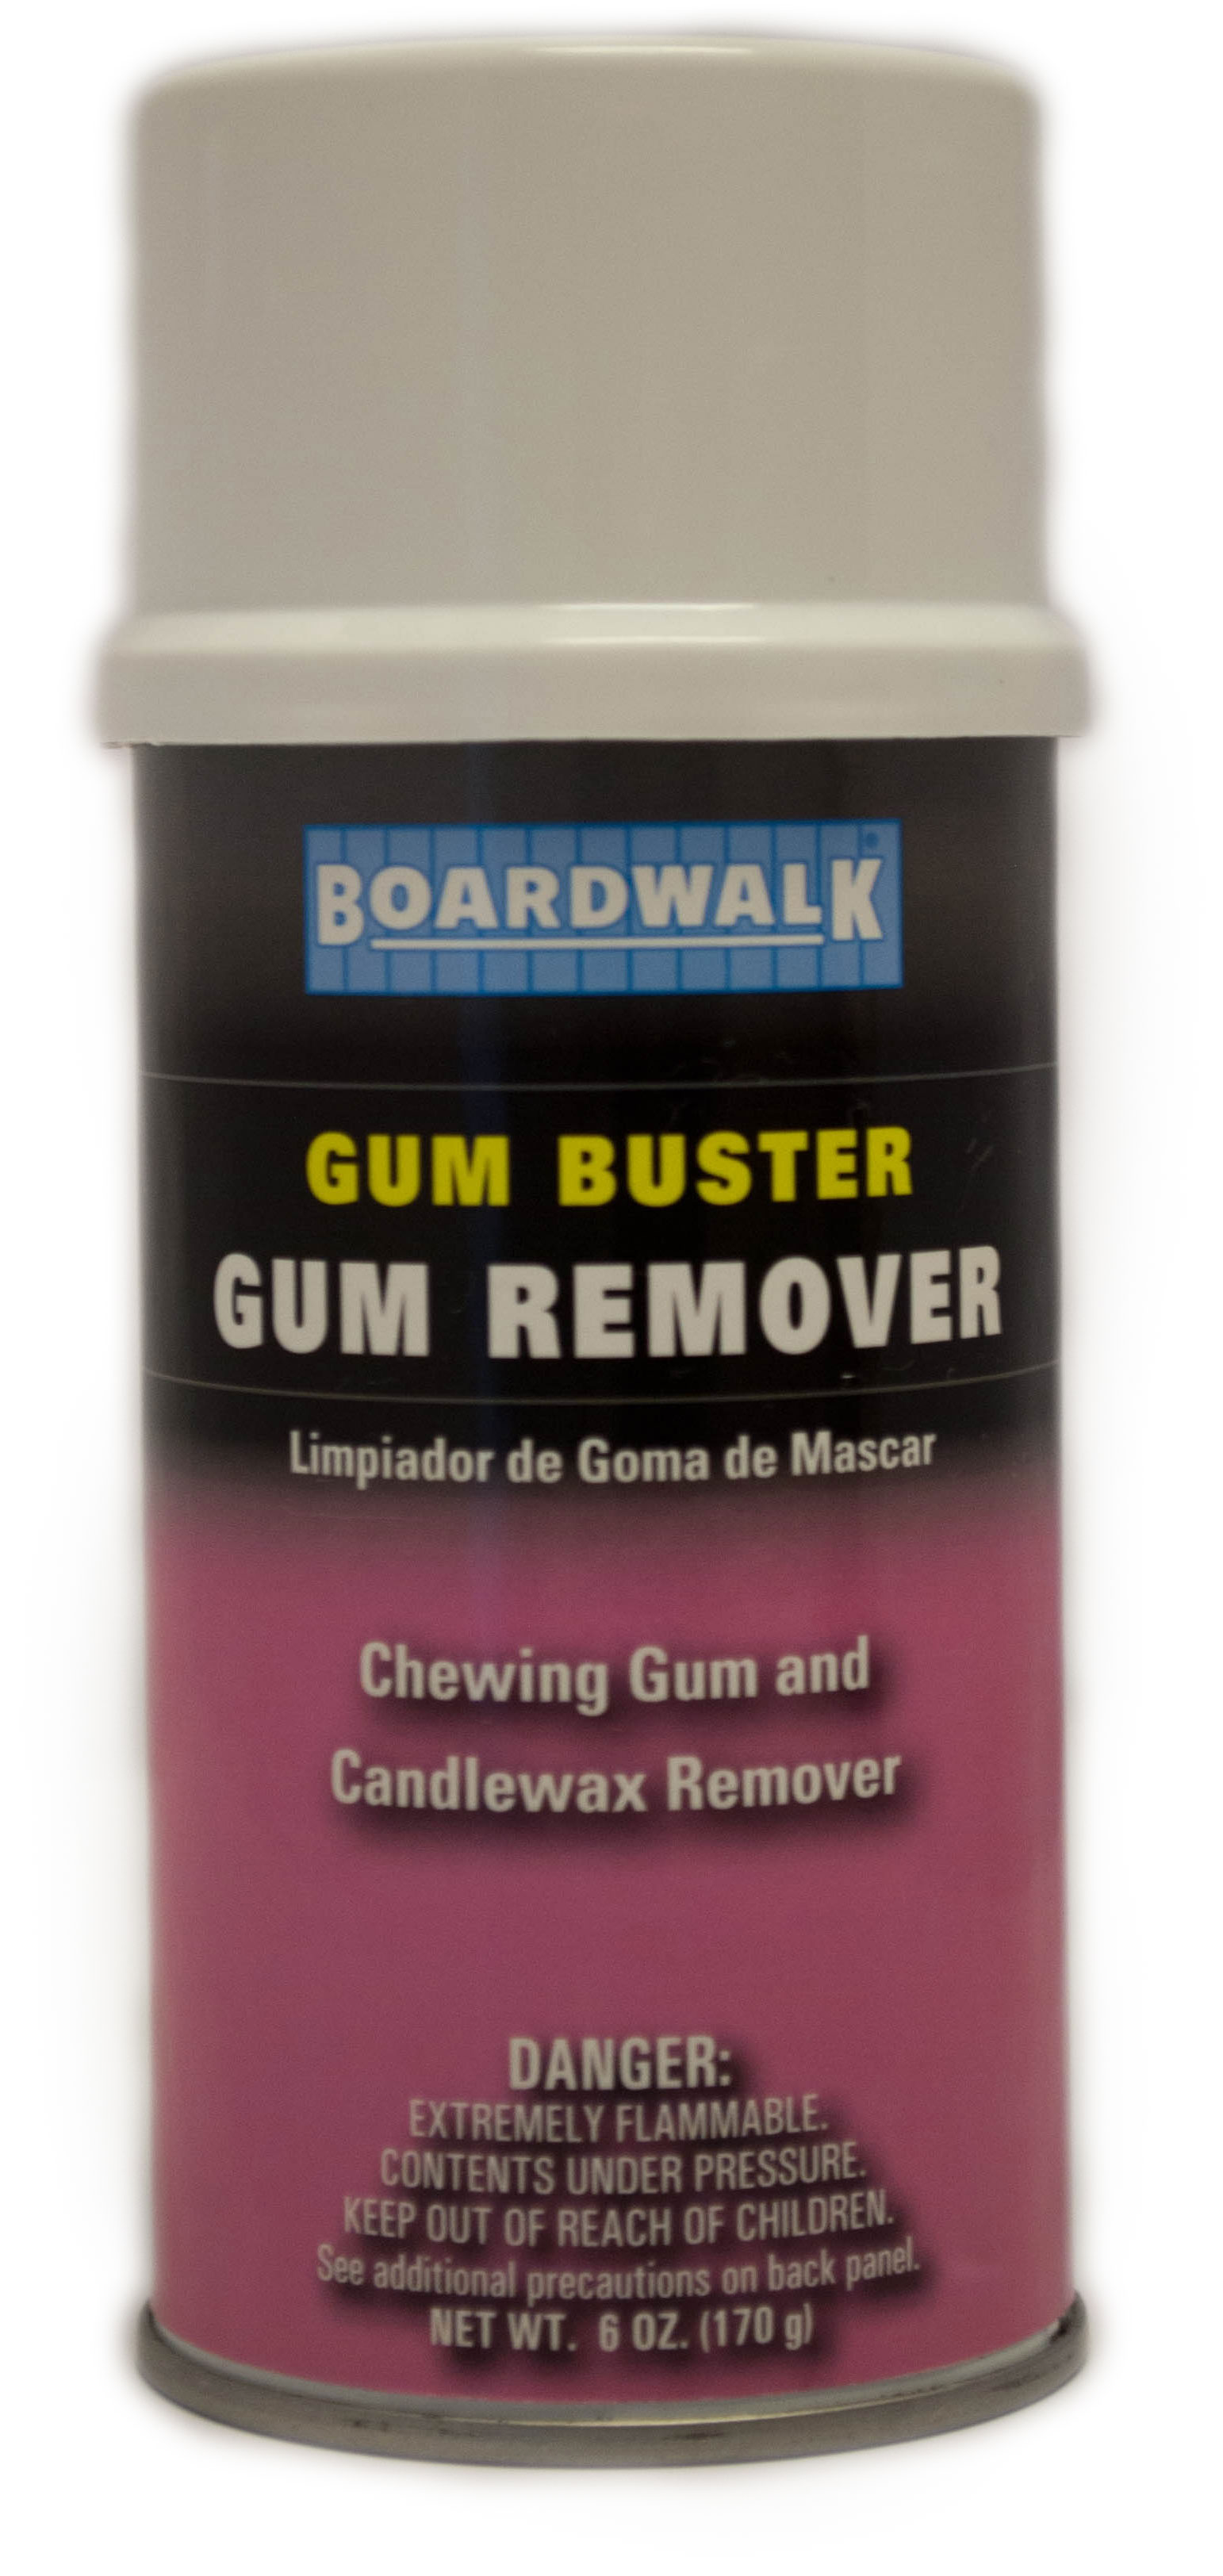 Chewing Gum & Candle Wax Remover - Engleside Products